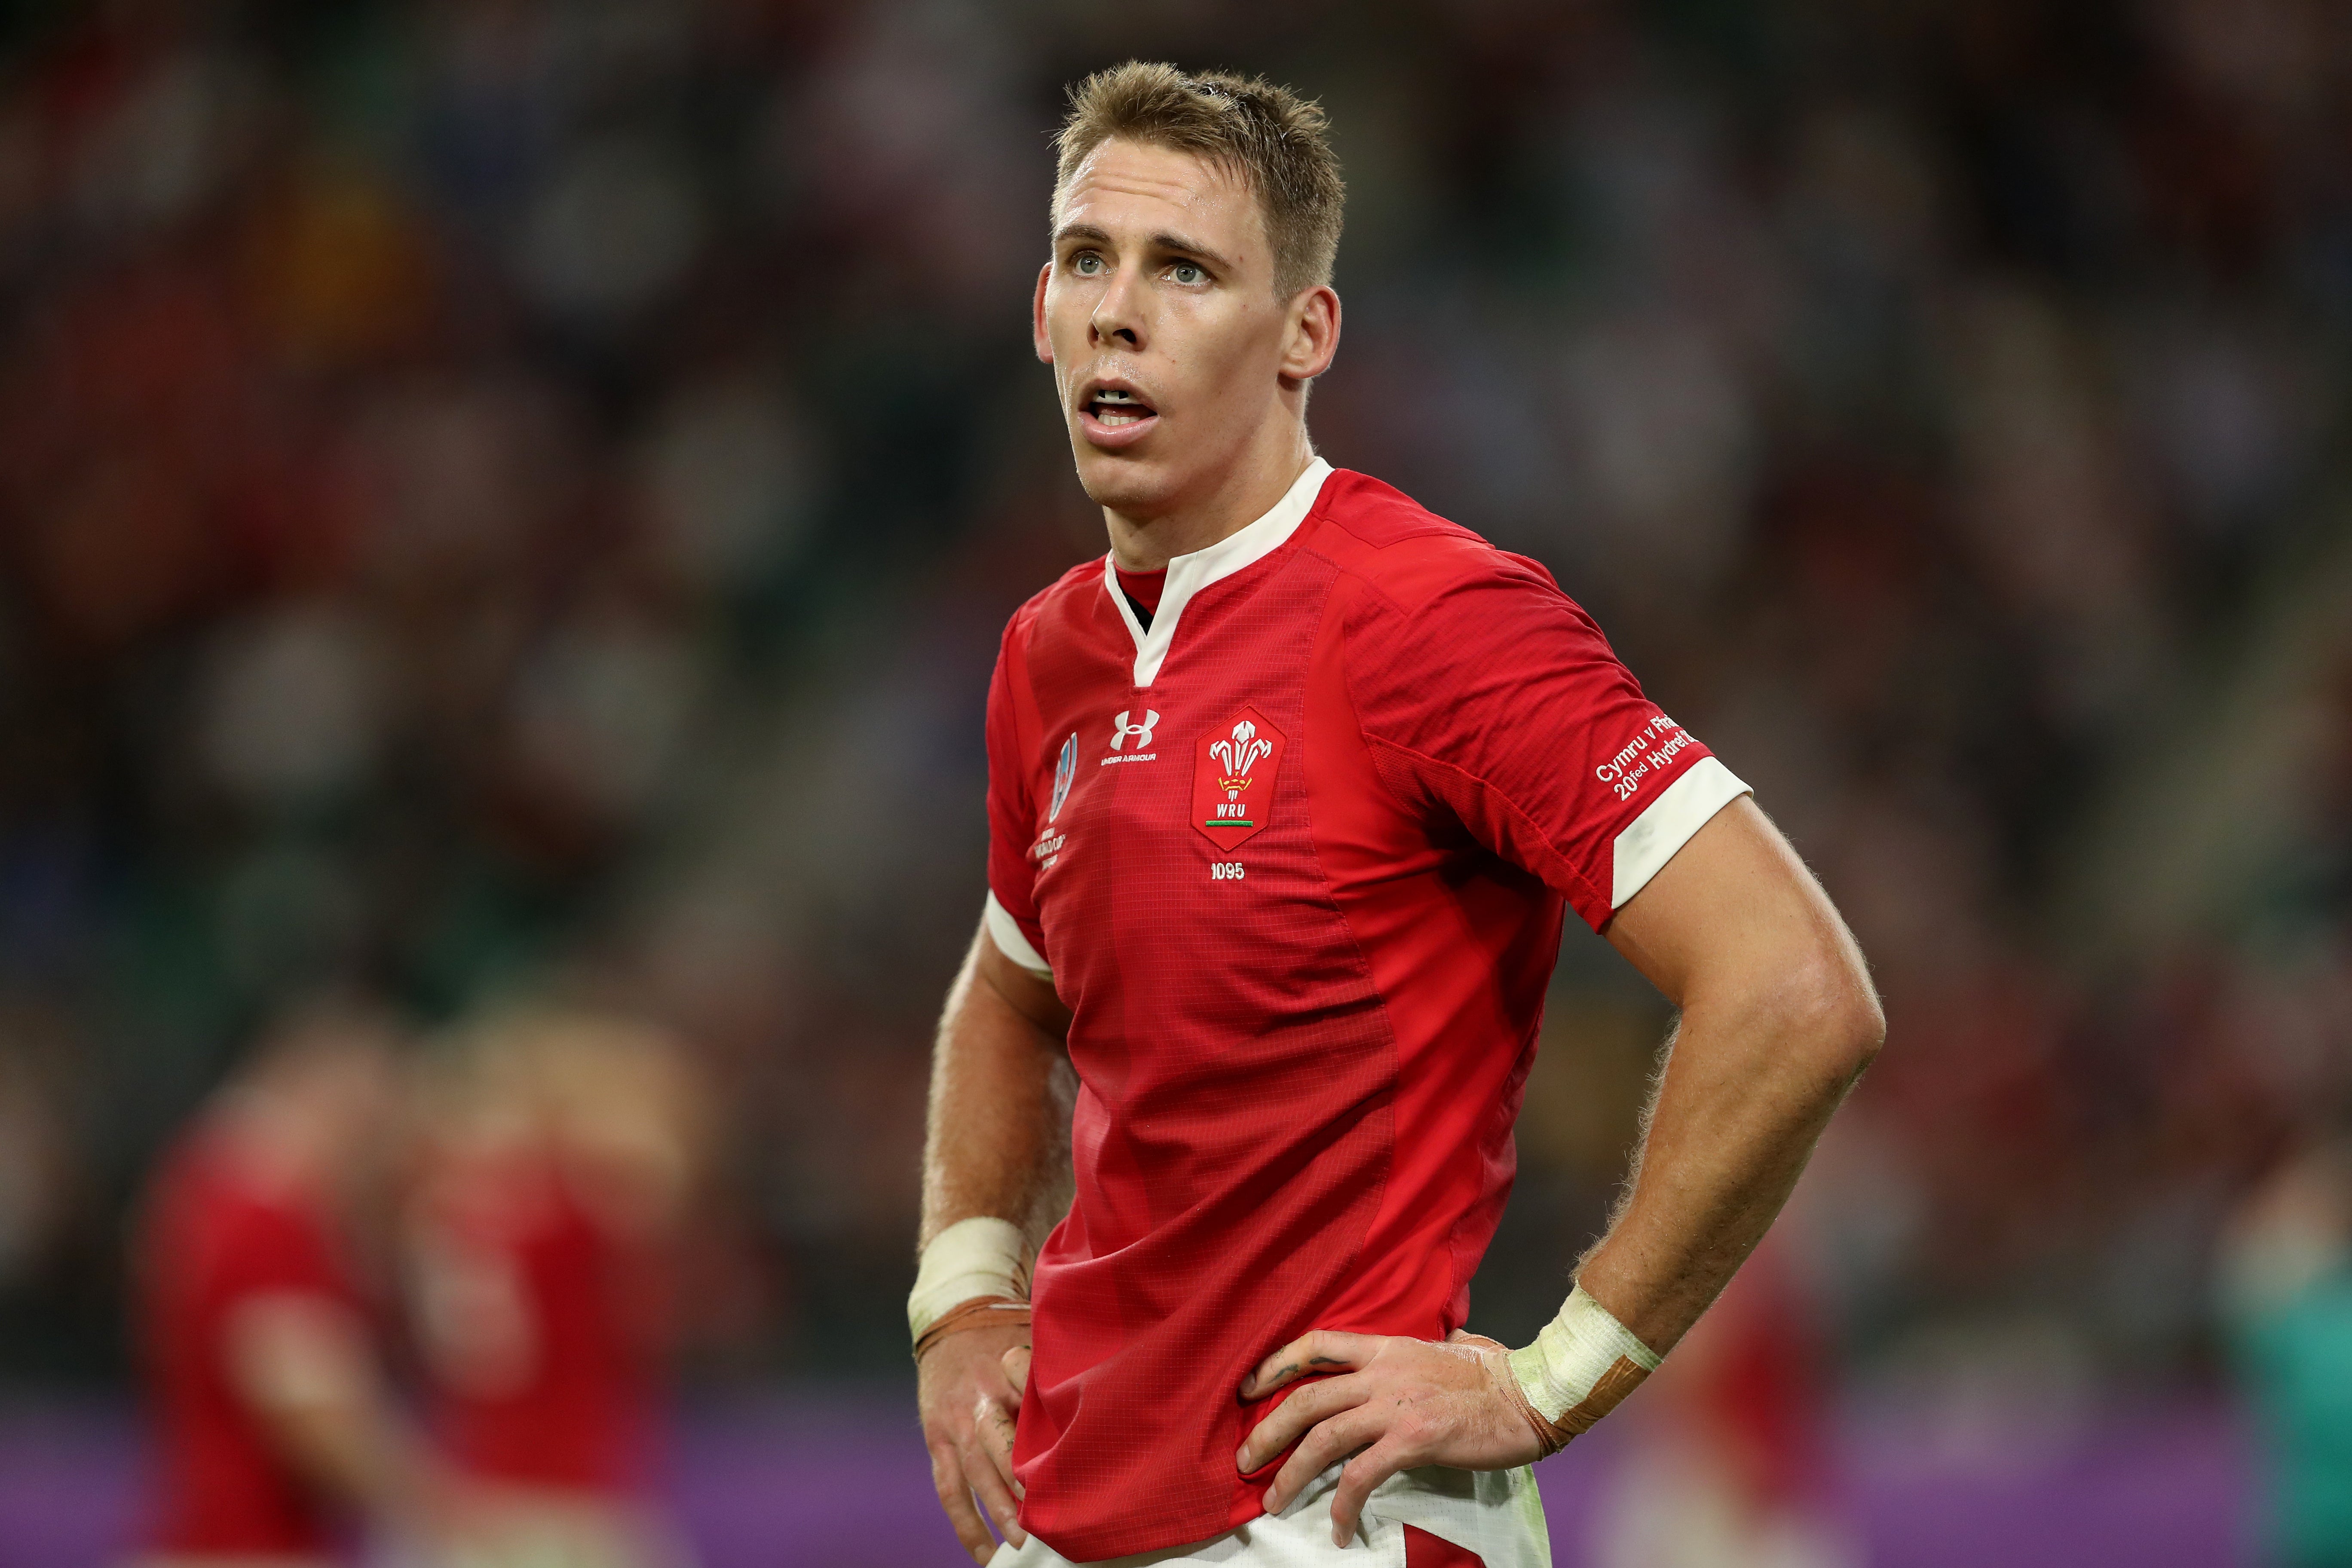 Liam Williams is set to return against South Africa